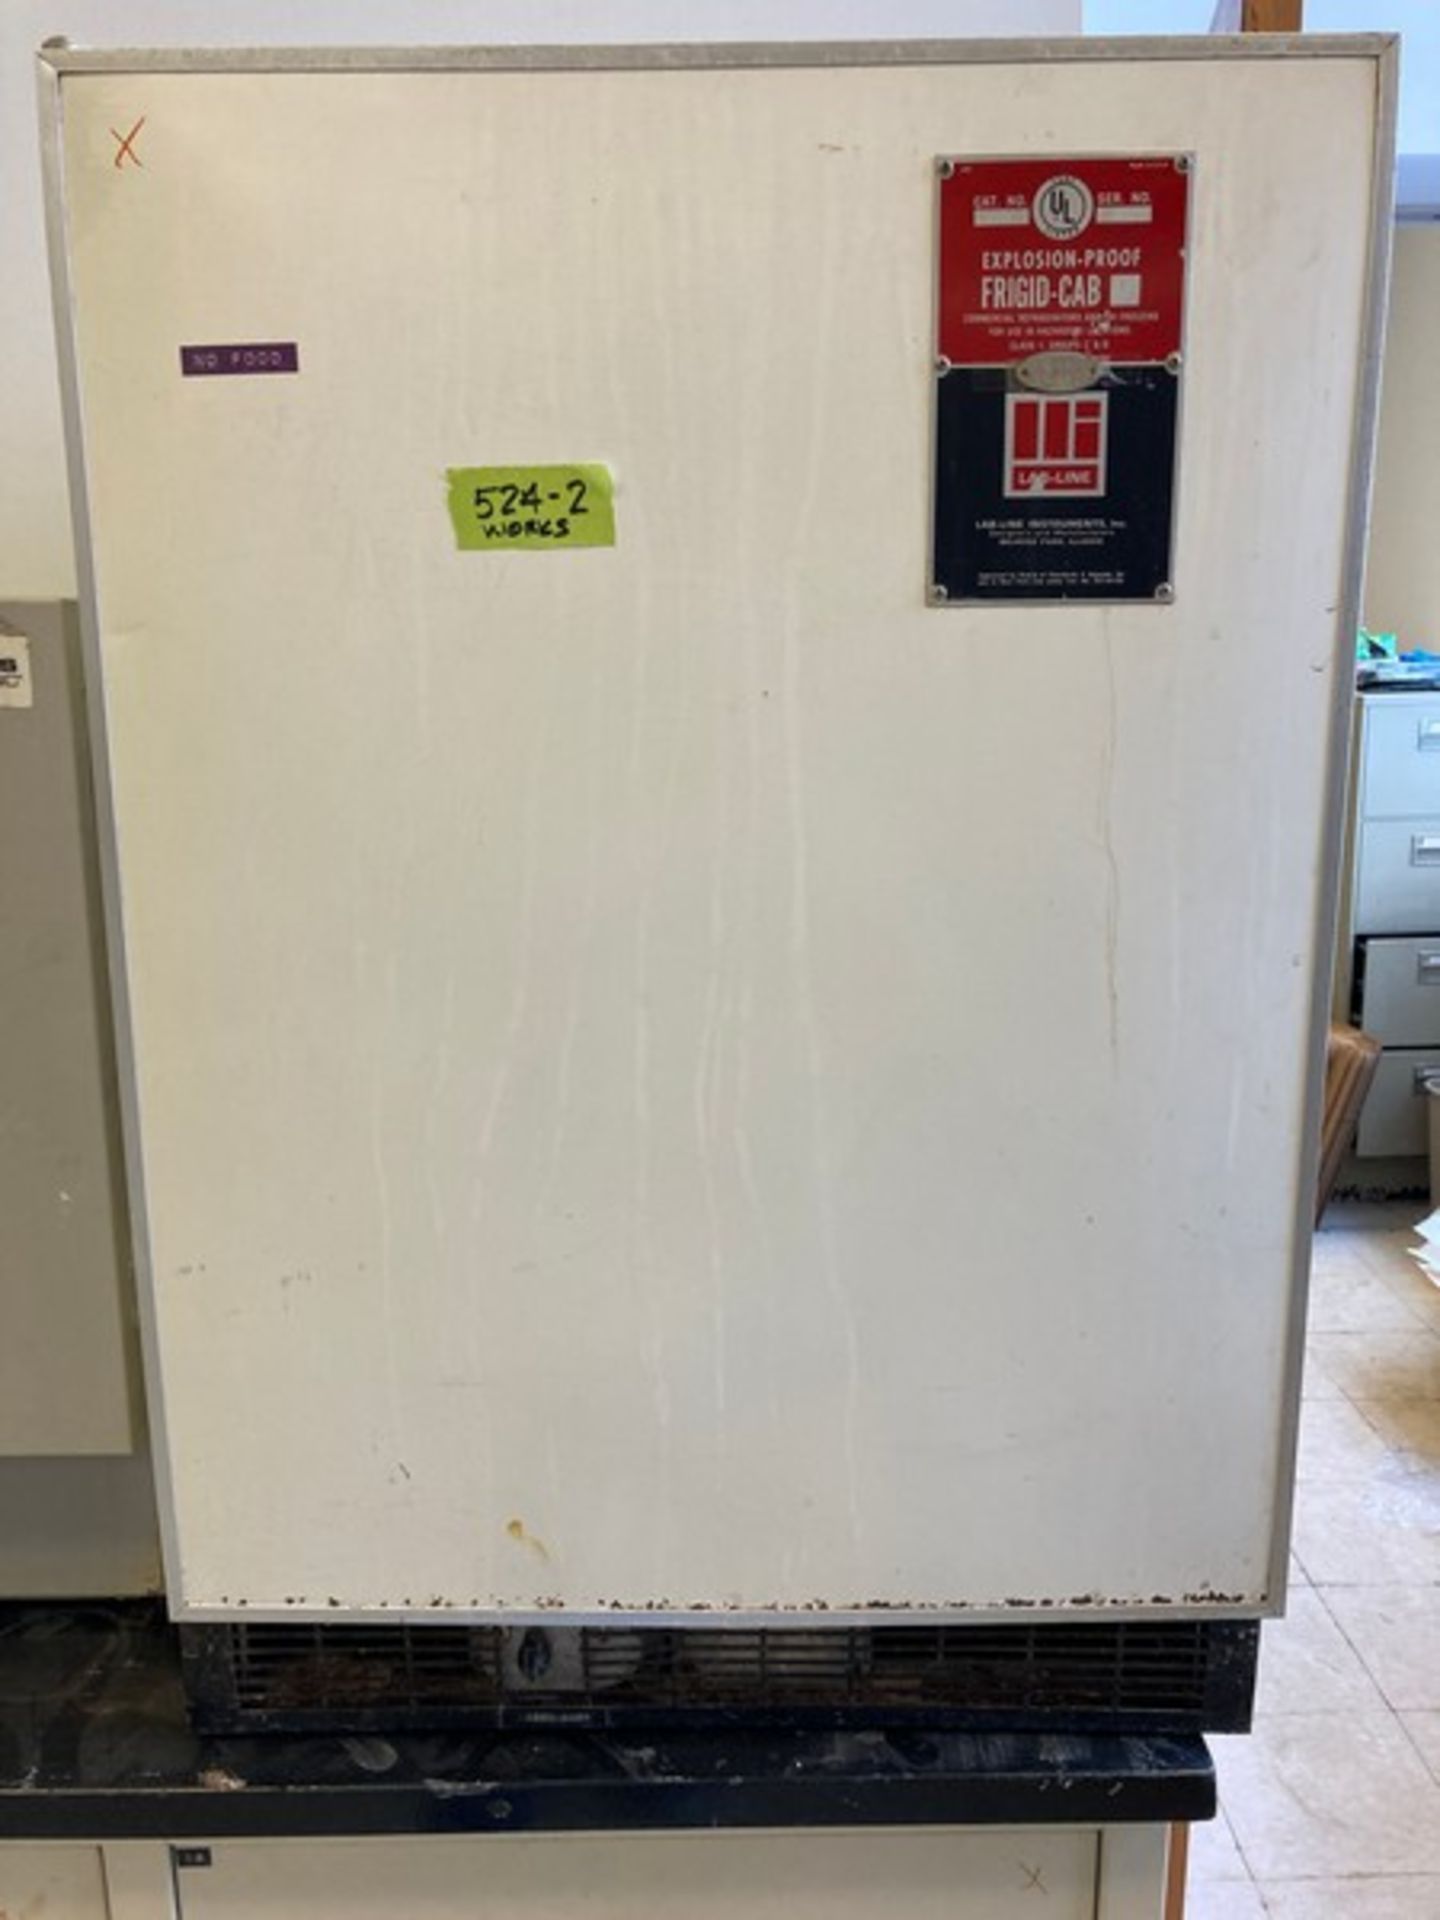 2 Lab items and Glassware: Explosion-Proof Refrigerator - Lab-Line Instruments 3557, 24"Wx24"Dx34. - Image 2 of 4